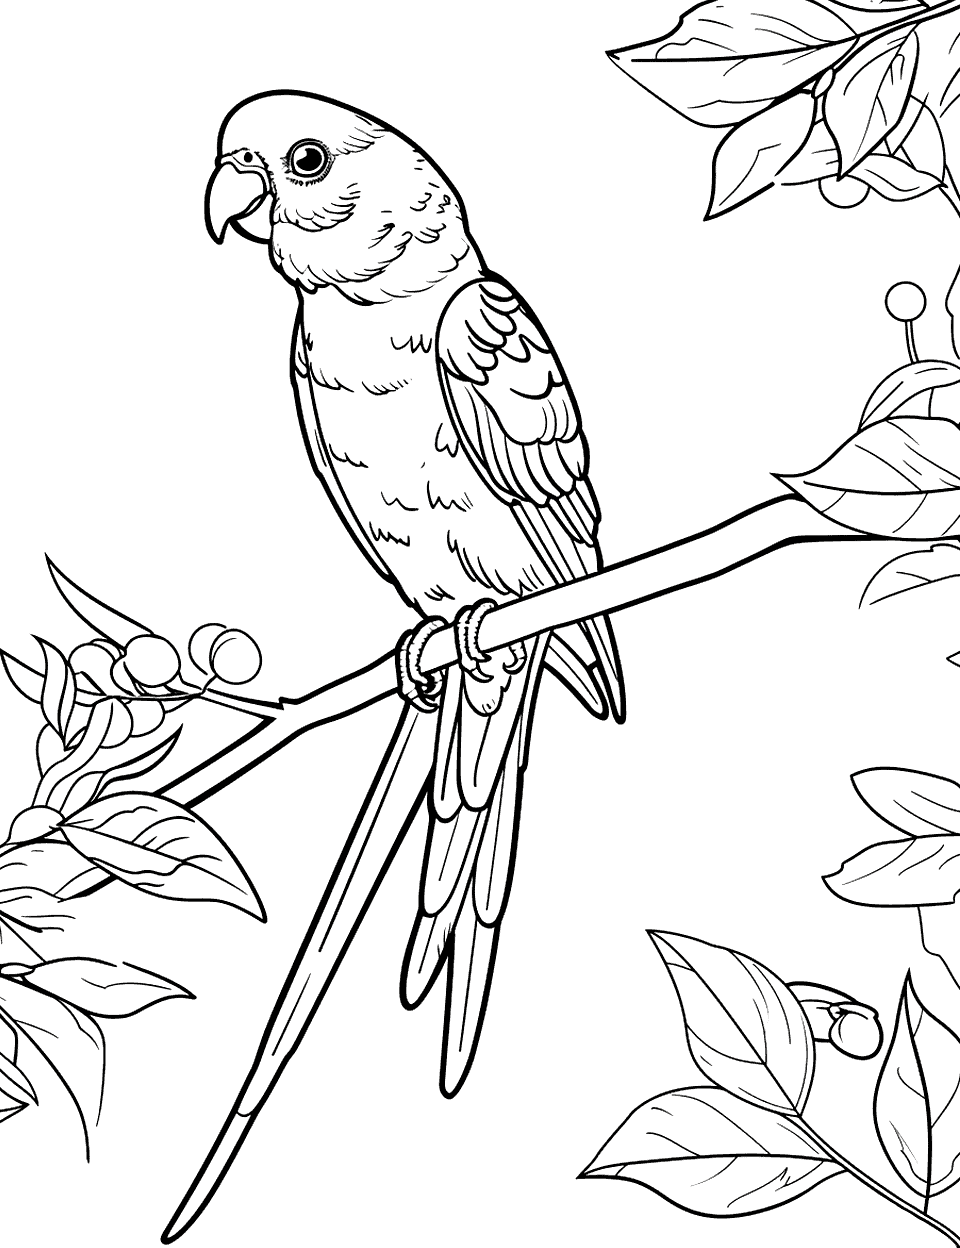 Parakeet Paradise Parrot Coloring Page - A cheerful parakeet chirping on a thin branch, with a few leaves around.